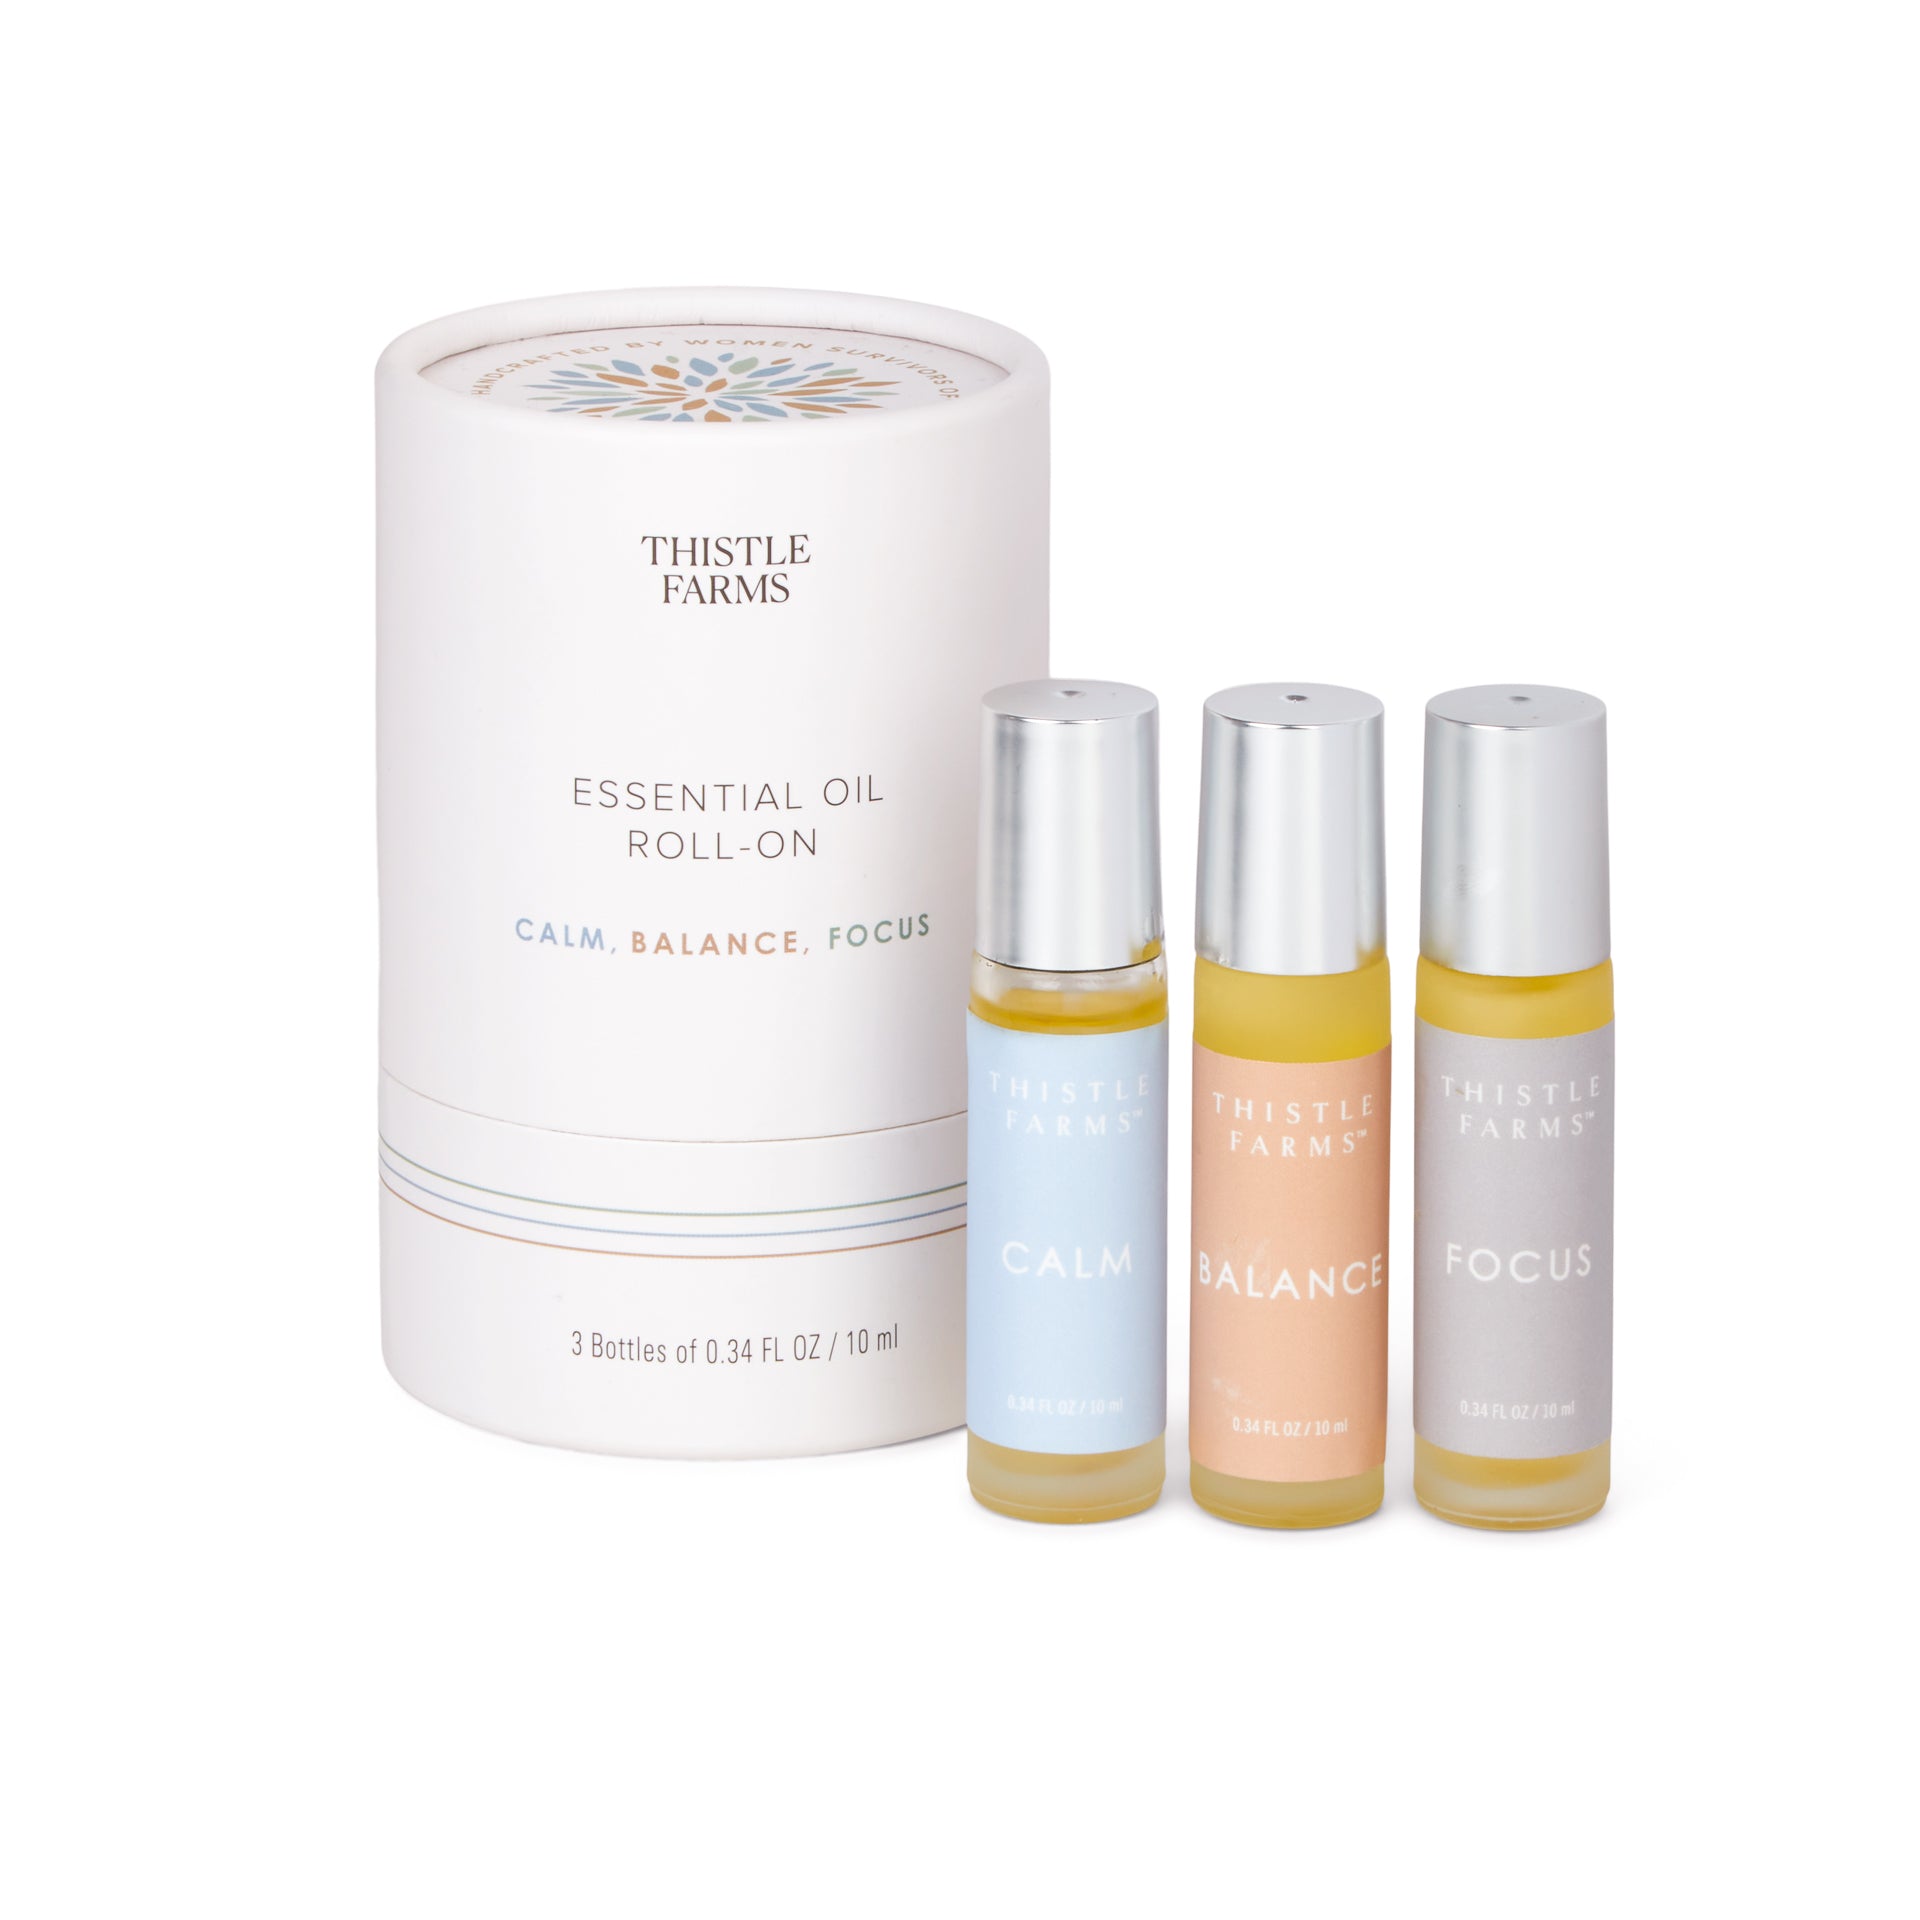 Create Your Own 14 Pack Aromatherapy Set - Pick your favorite